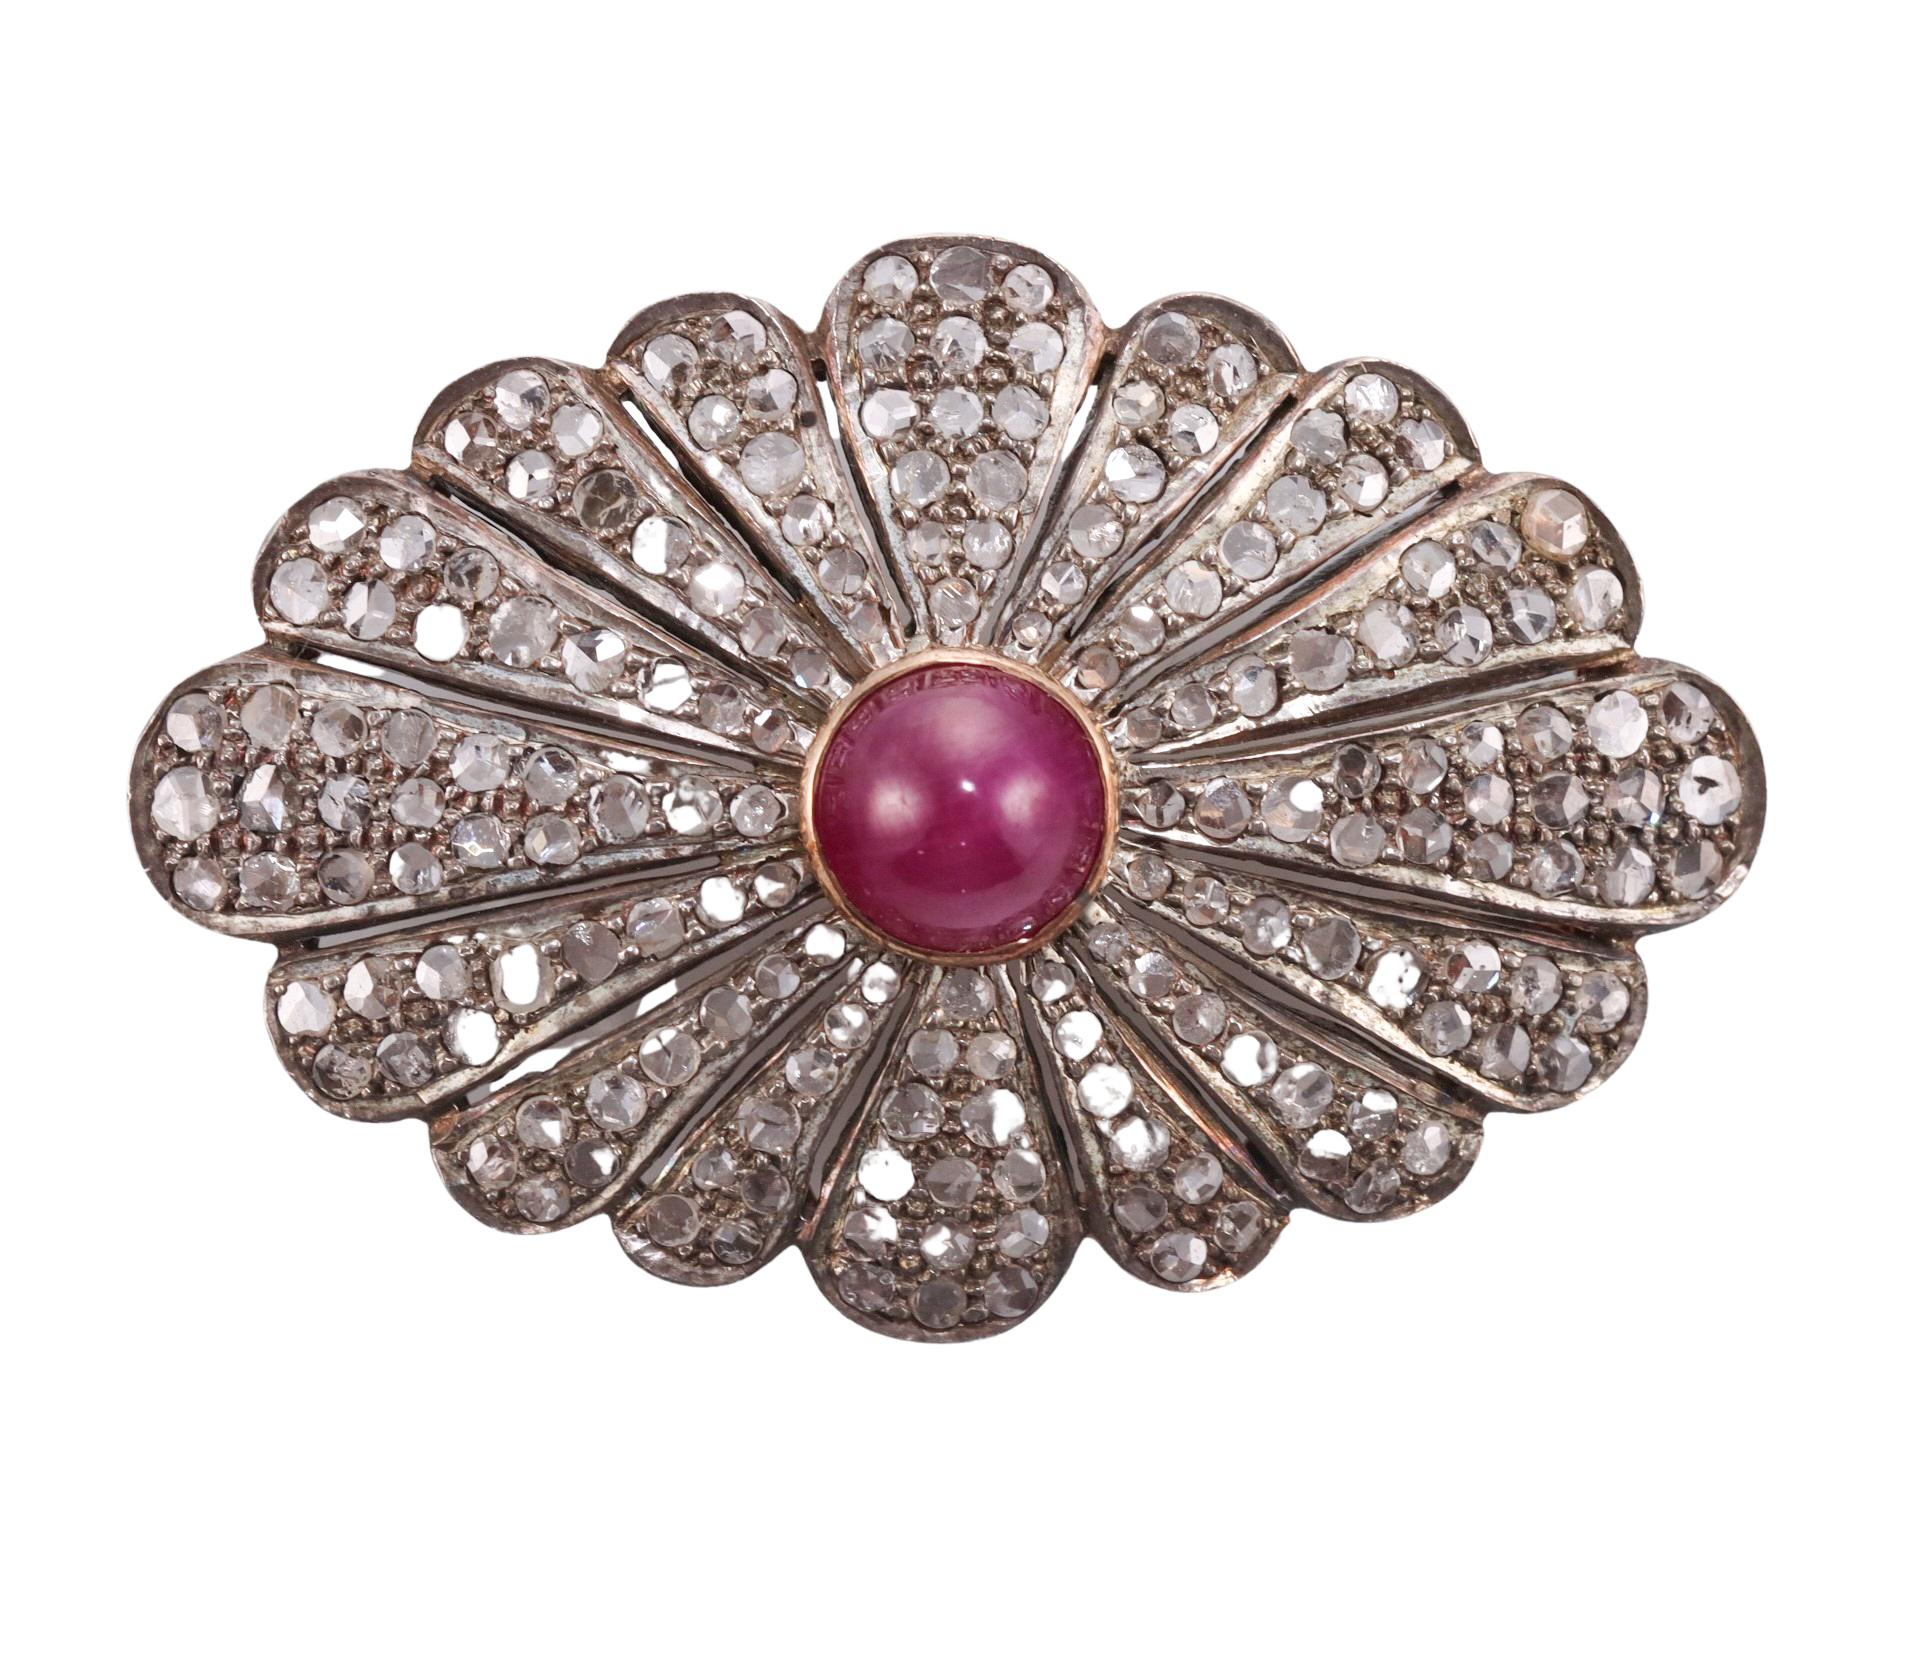 Antique 14k gold and silver brooch, featuring rose cut diamonds and center 8mm ruby cabochon. Brooch measures 46mm x 30mm. Tested gold and silver, not marked. Weighs 10.8 grams. 